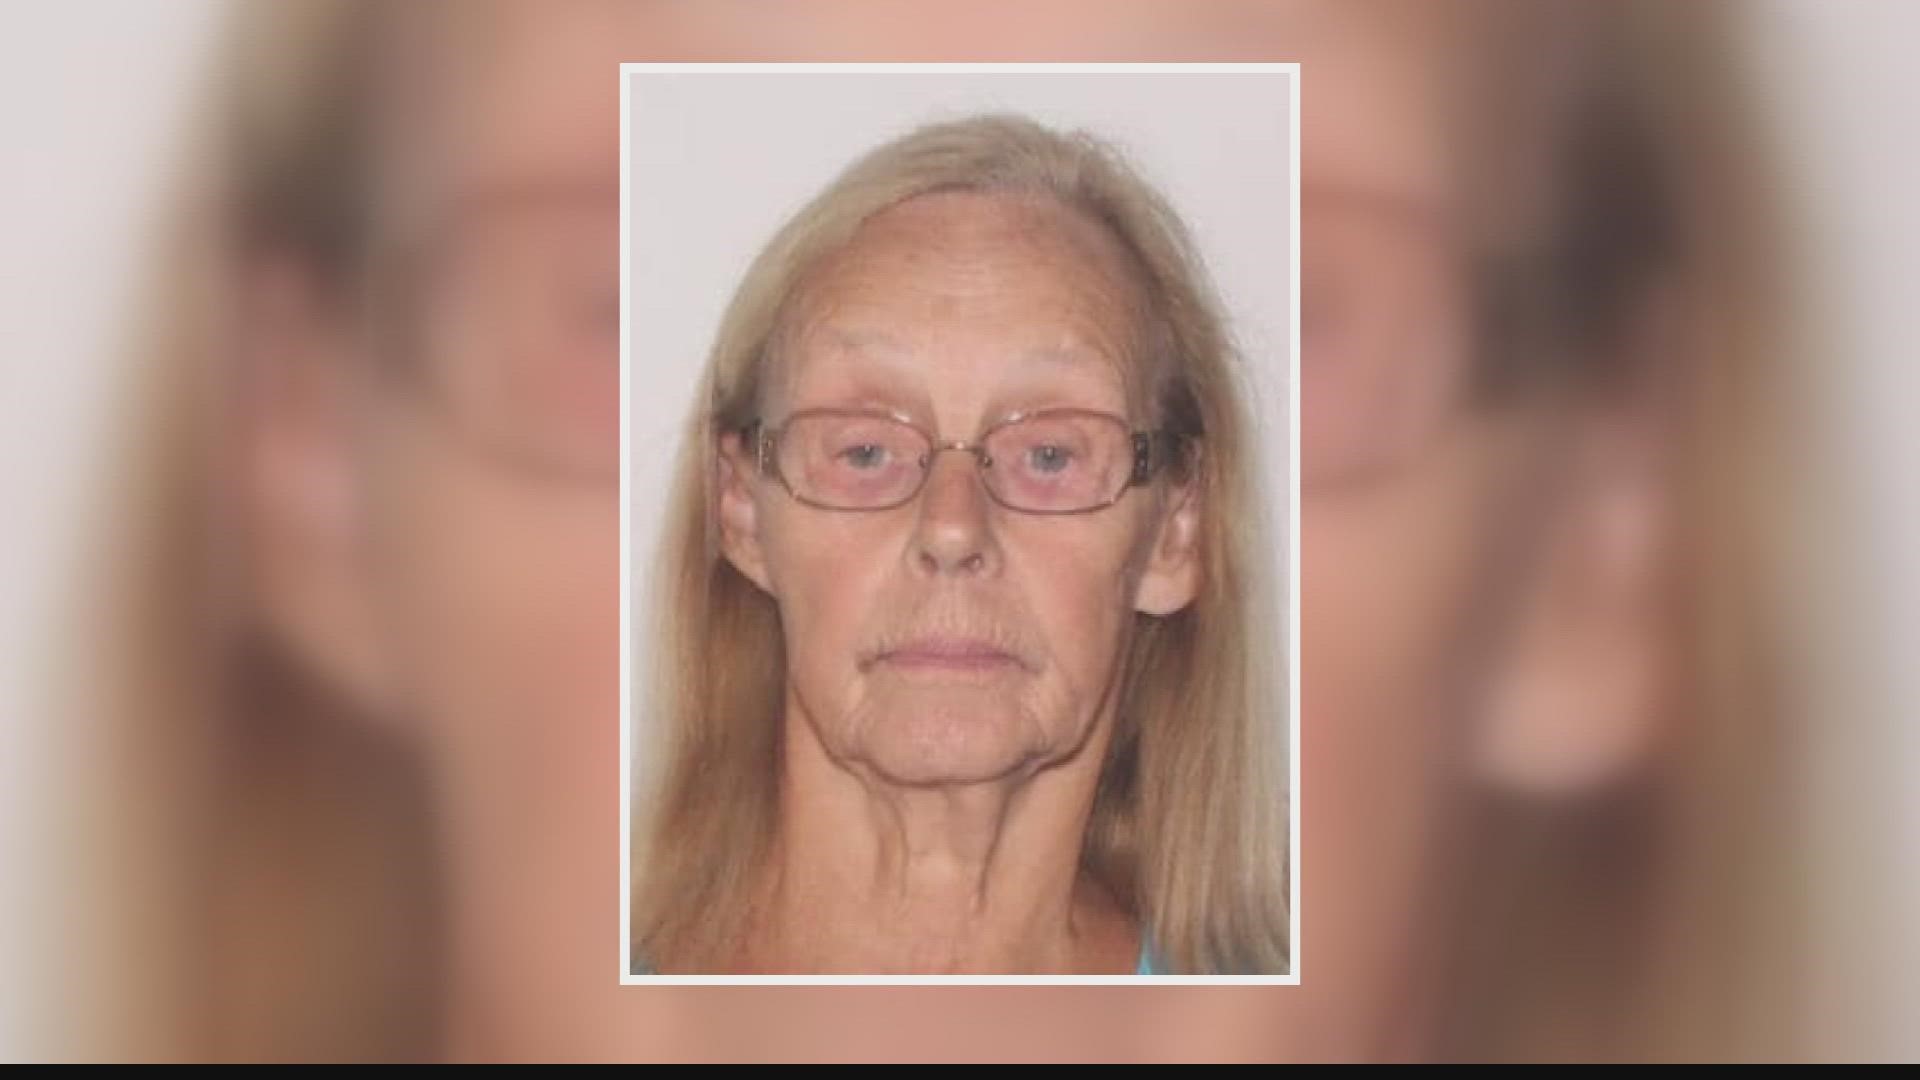 71-year-old Claire Luscombe was reported missing June 29.